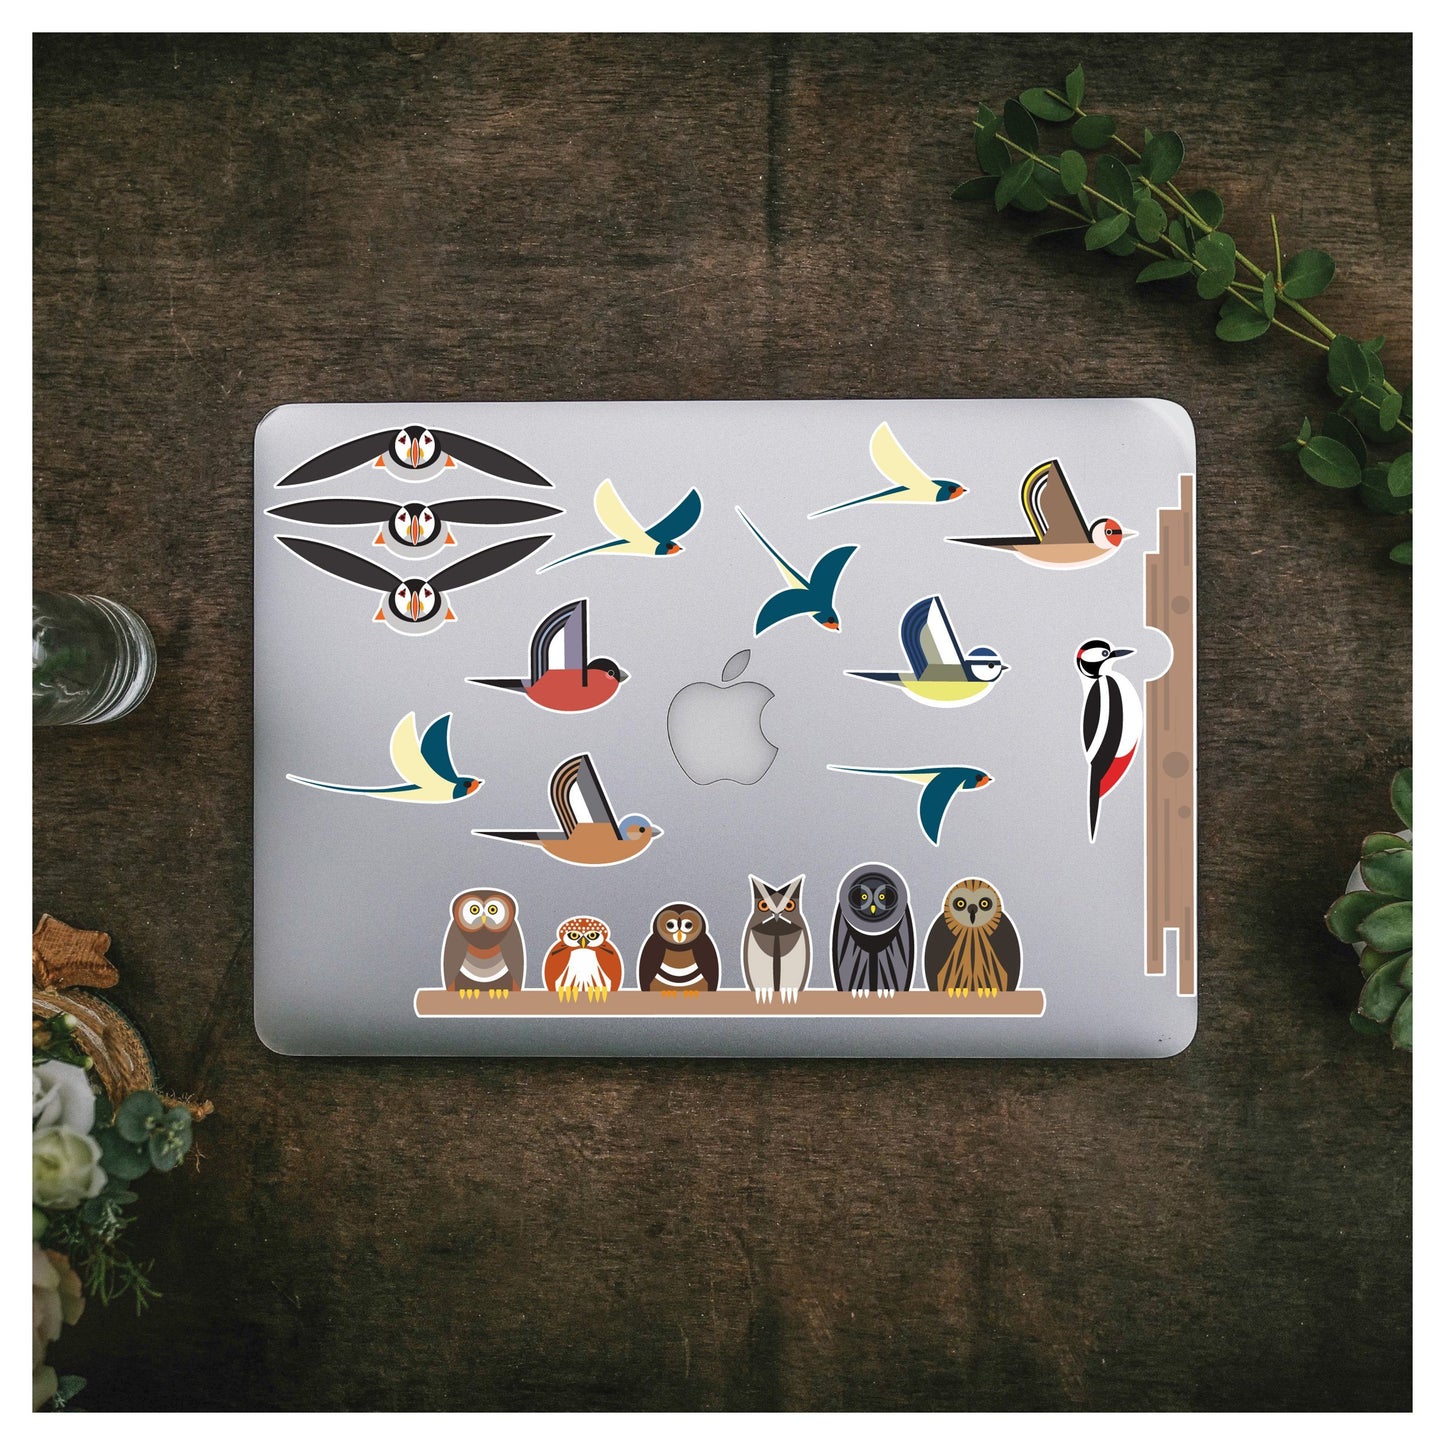 Variety of Birds Laptop Stickers - Stickers for Laptops